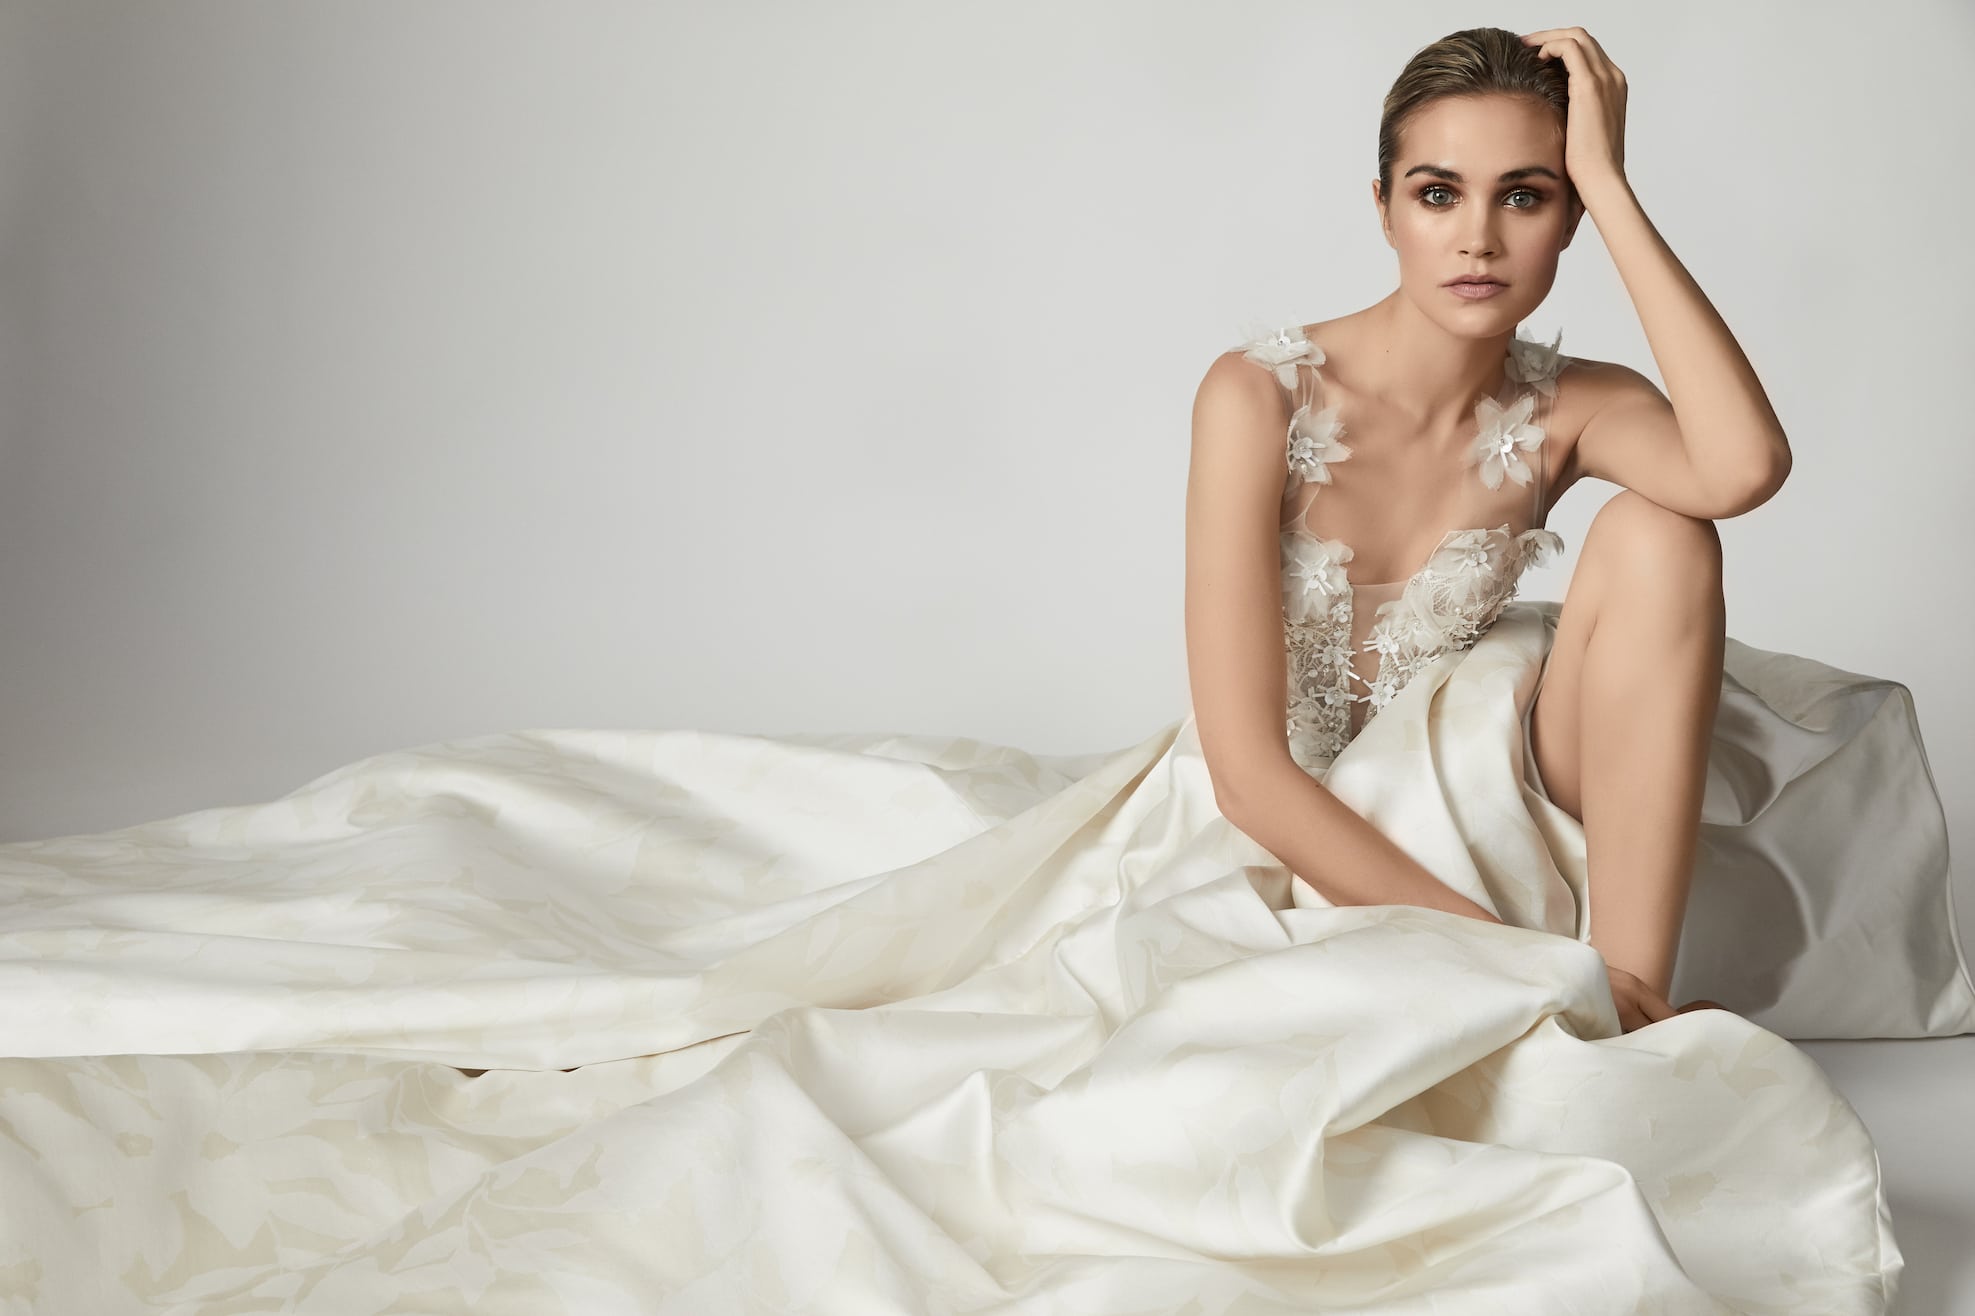 A woman sits on the ground in a flowing off-white gown from Our Story Bridal with floral appliqués on the bodice and illusion straps